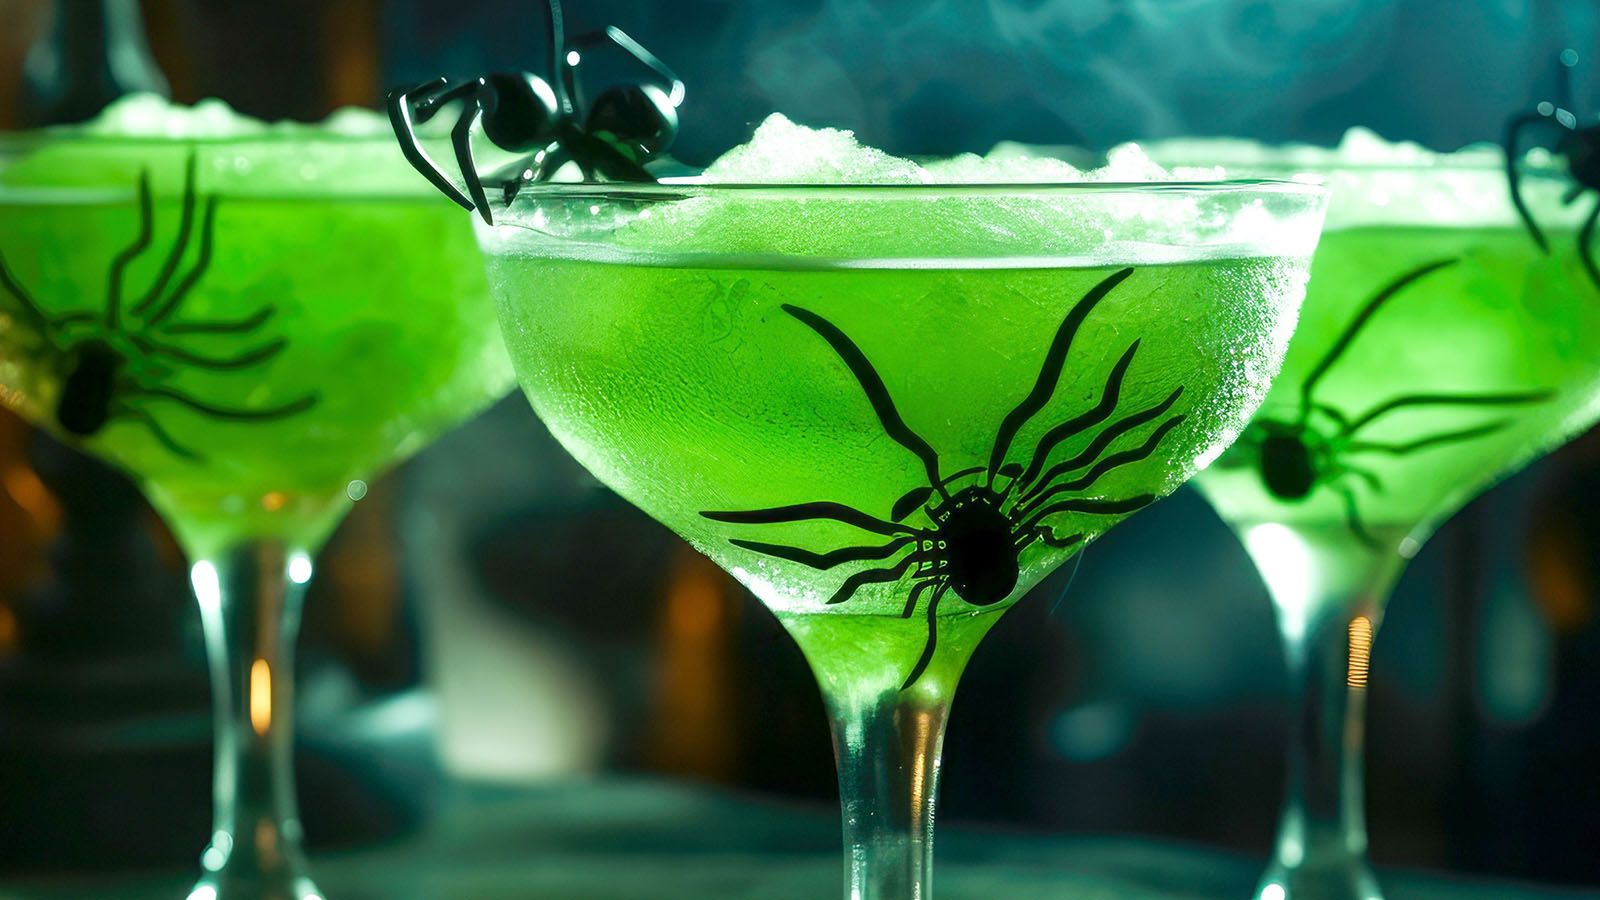 Mixology: Monster Mash will be at Science Central on Nov. 4.